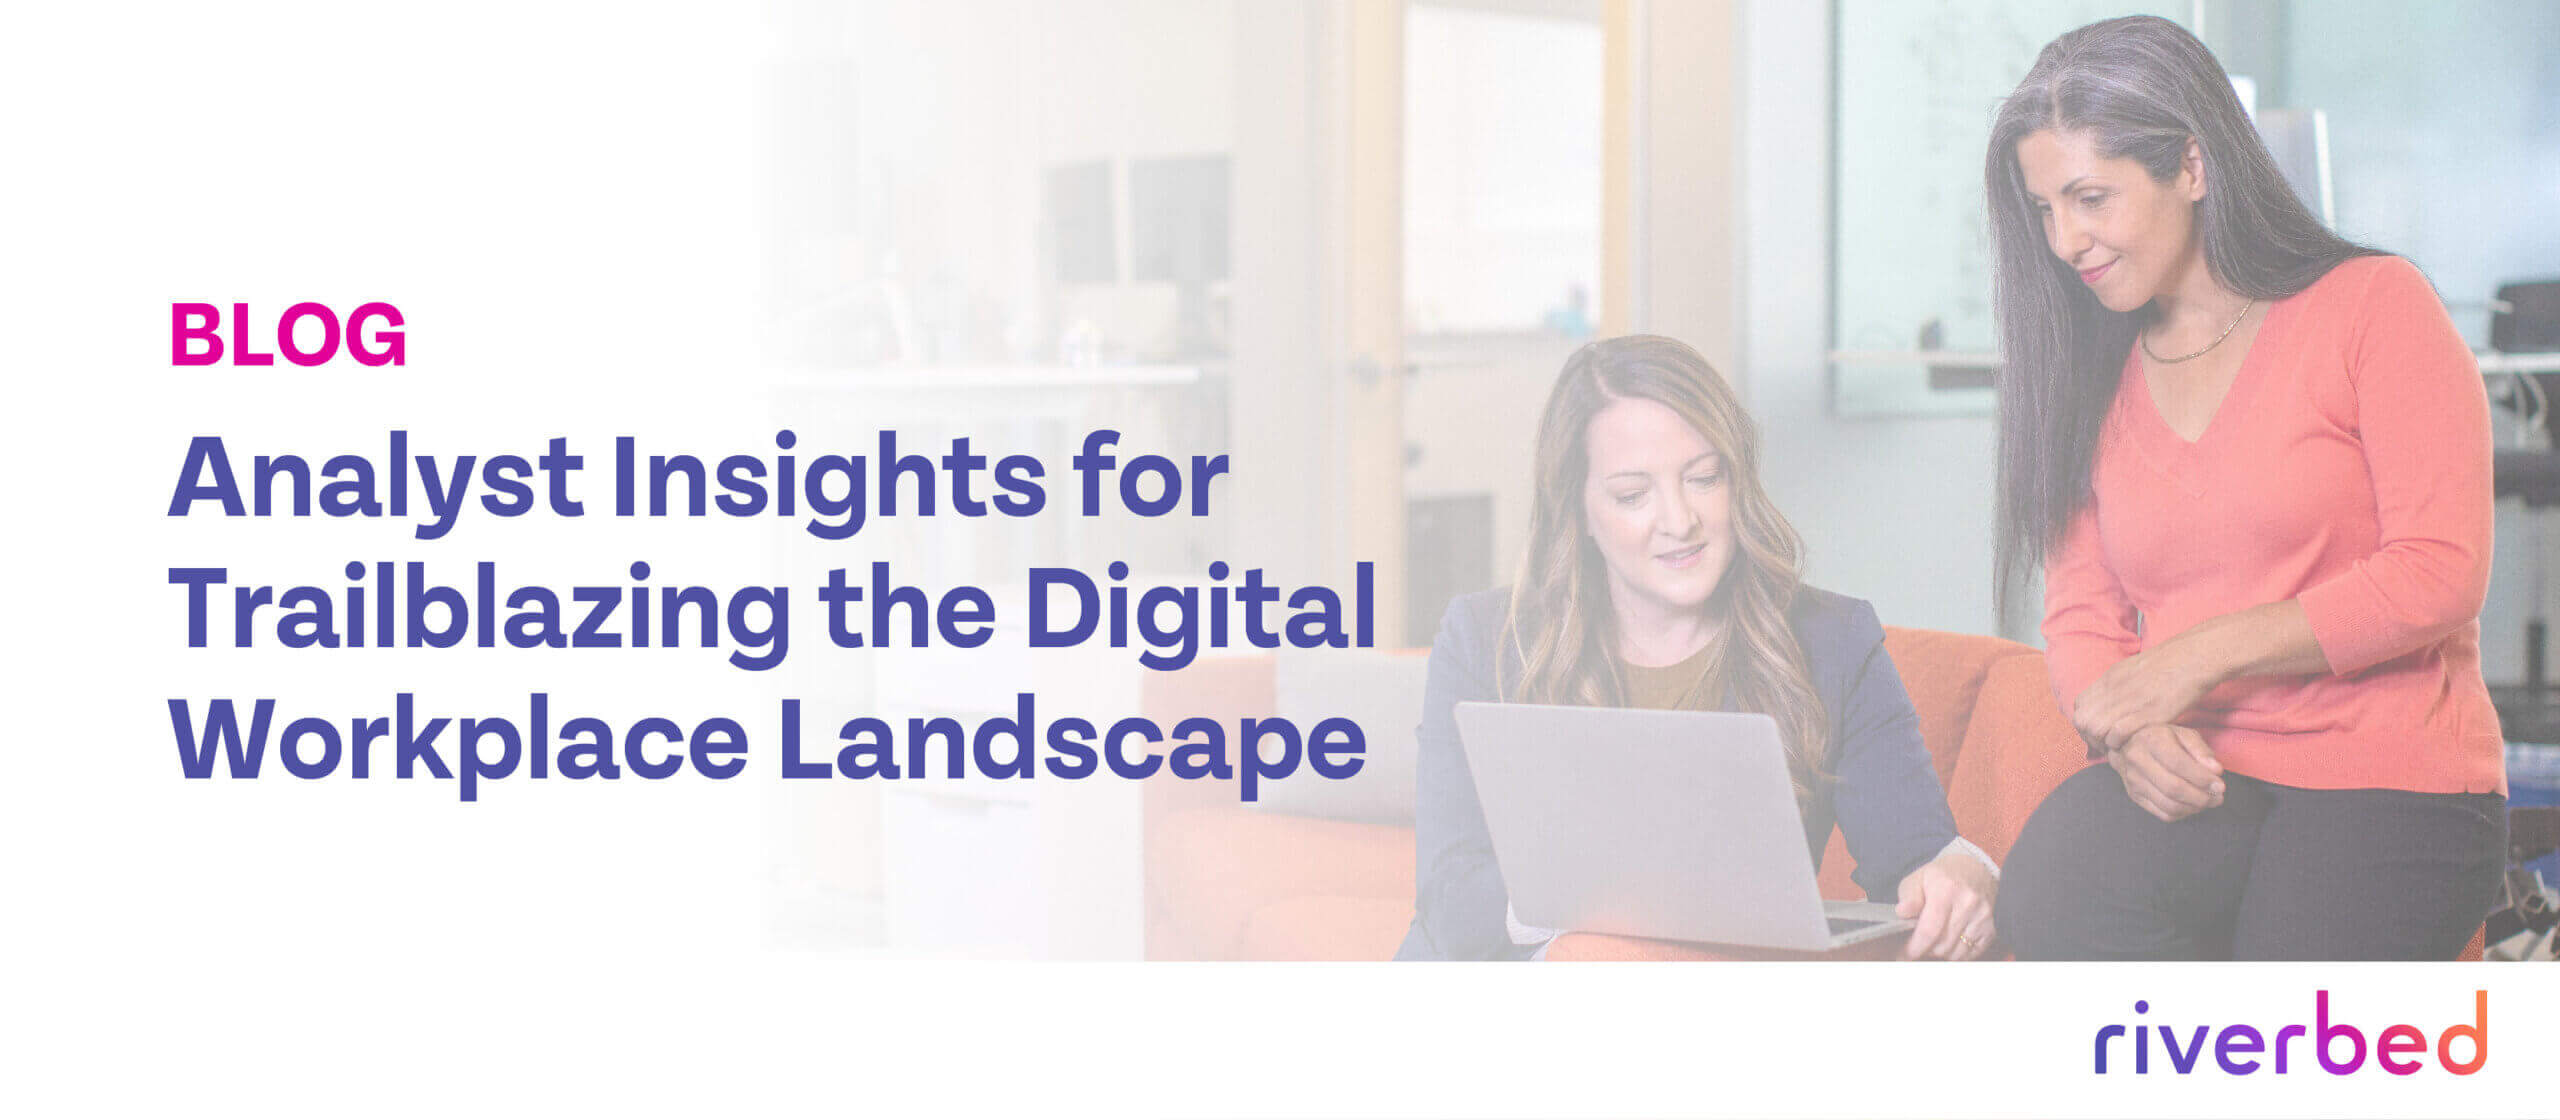 Analyst Insights for Trailblazing the Digital Workplace Landscape